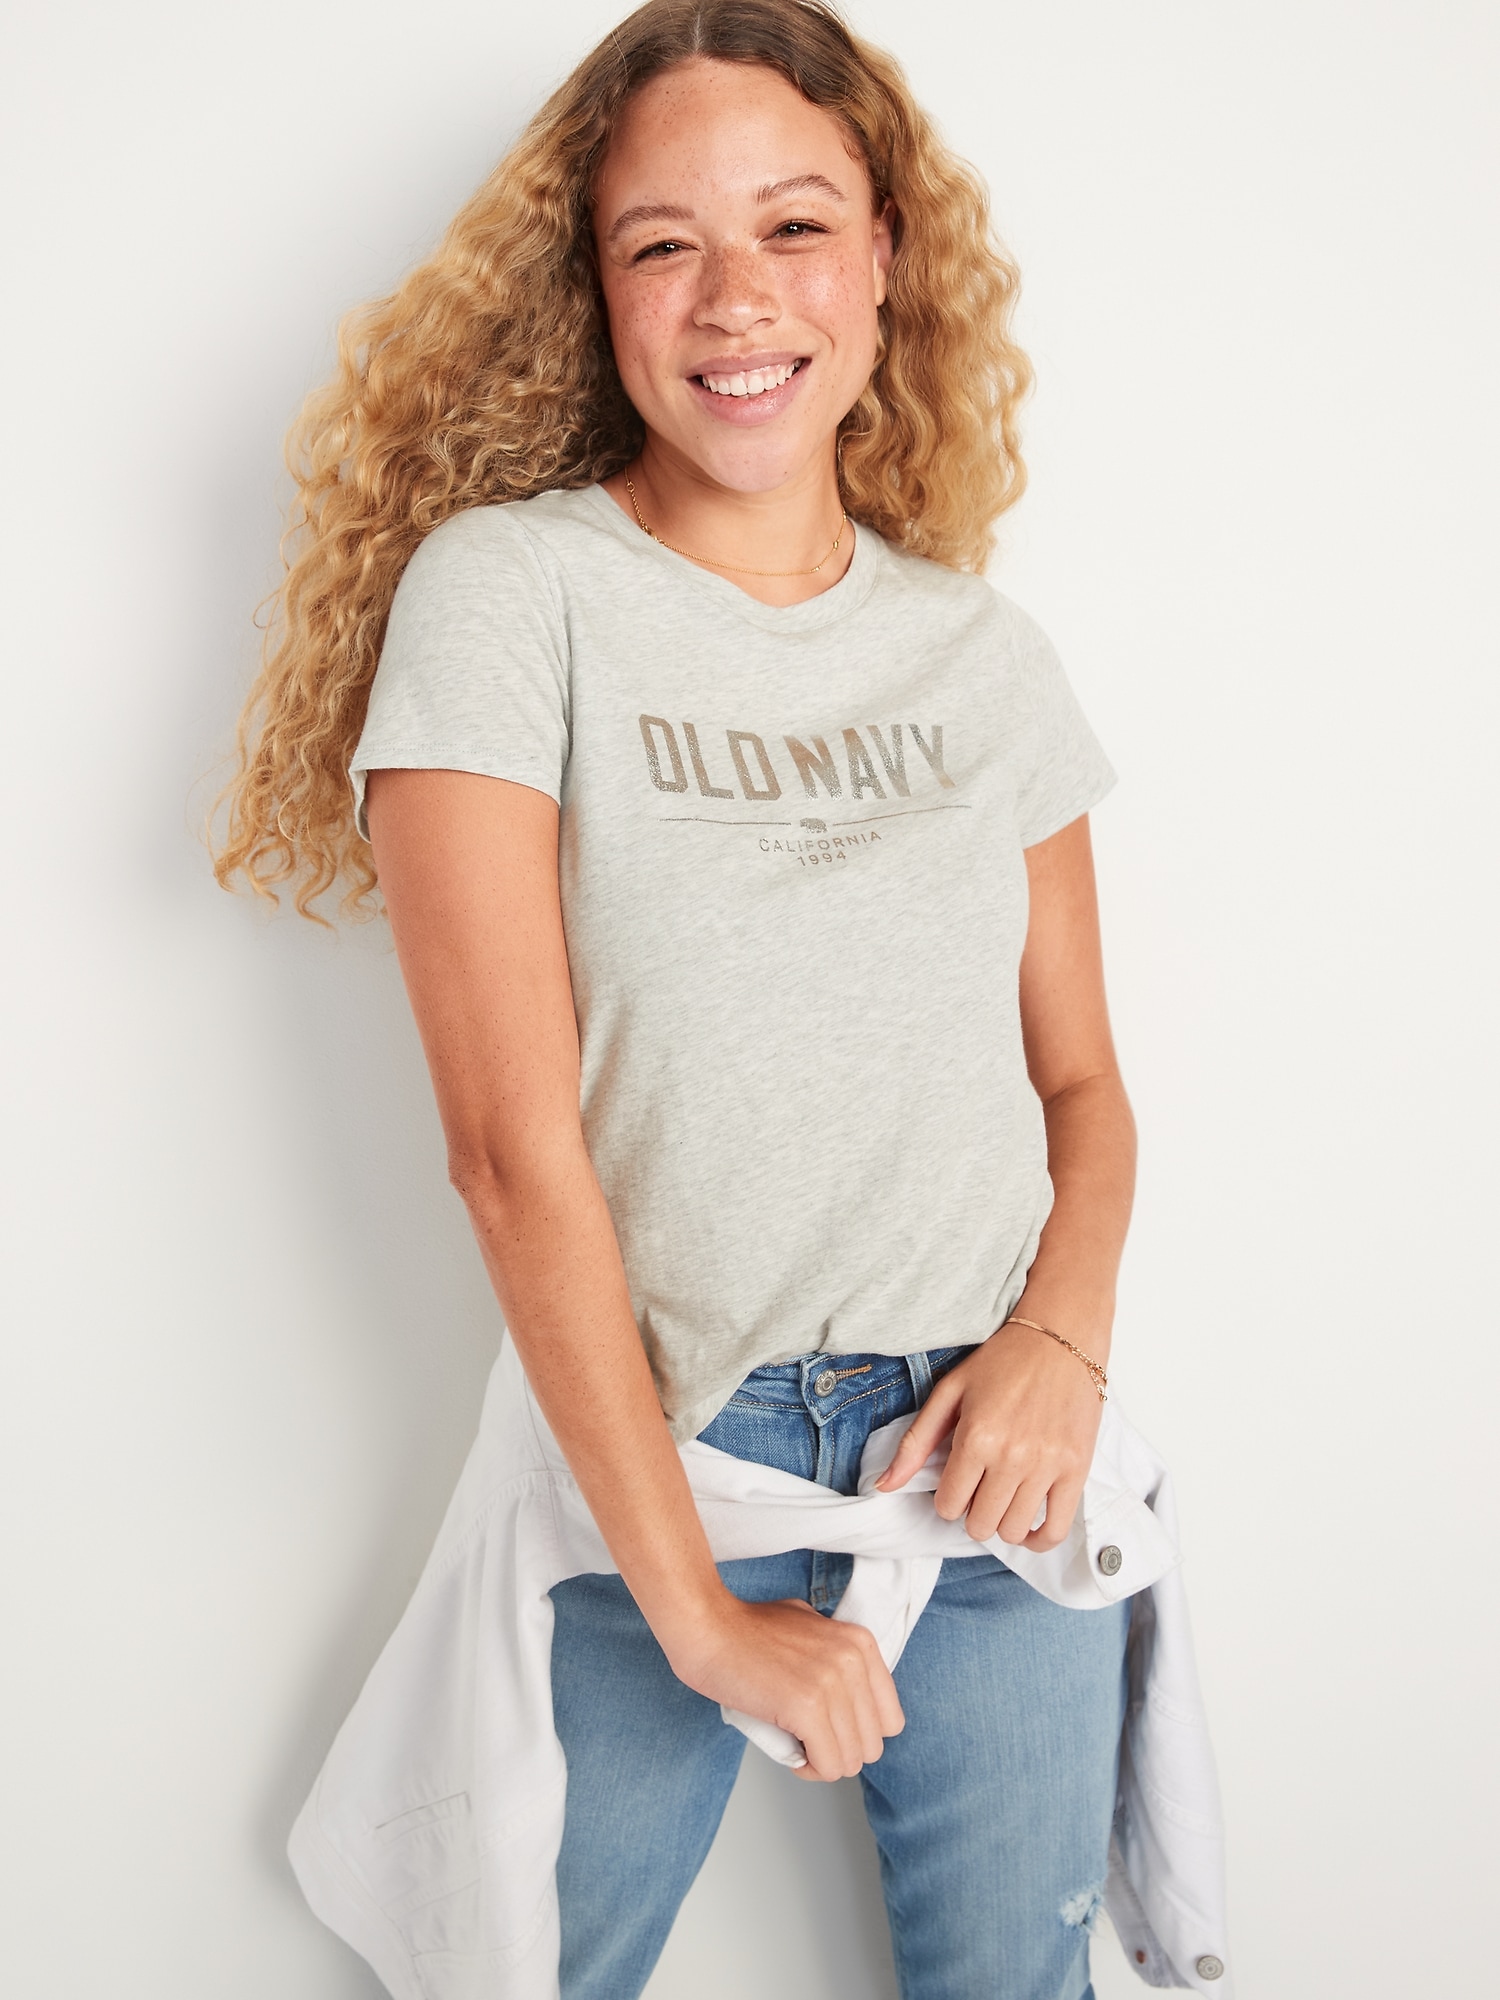 Old Navy Graphic & Solid Tees from $6 (Regularly $13+)